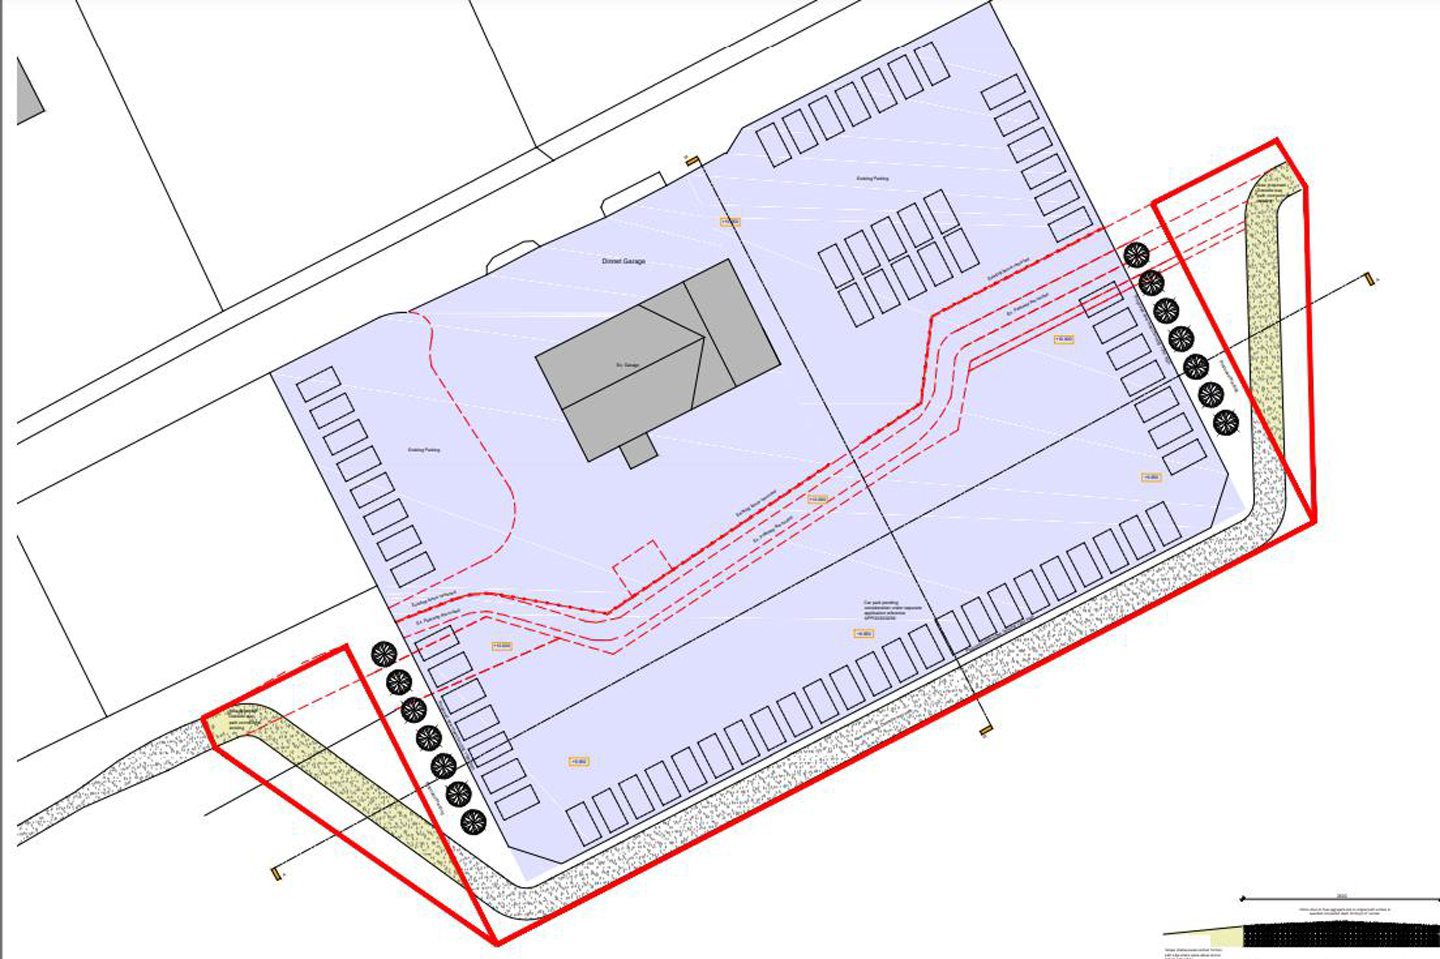 A map indicating how the site will look